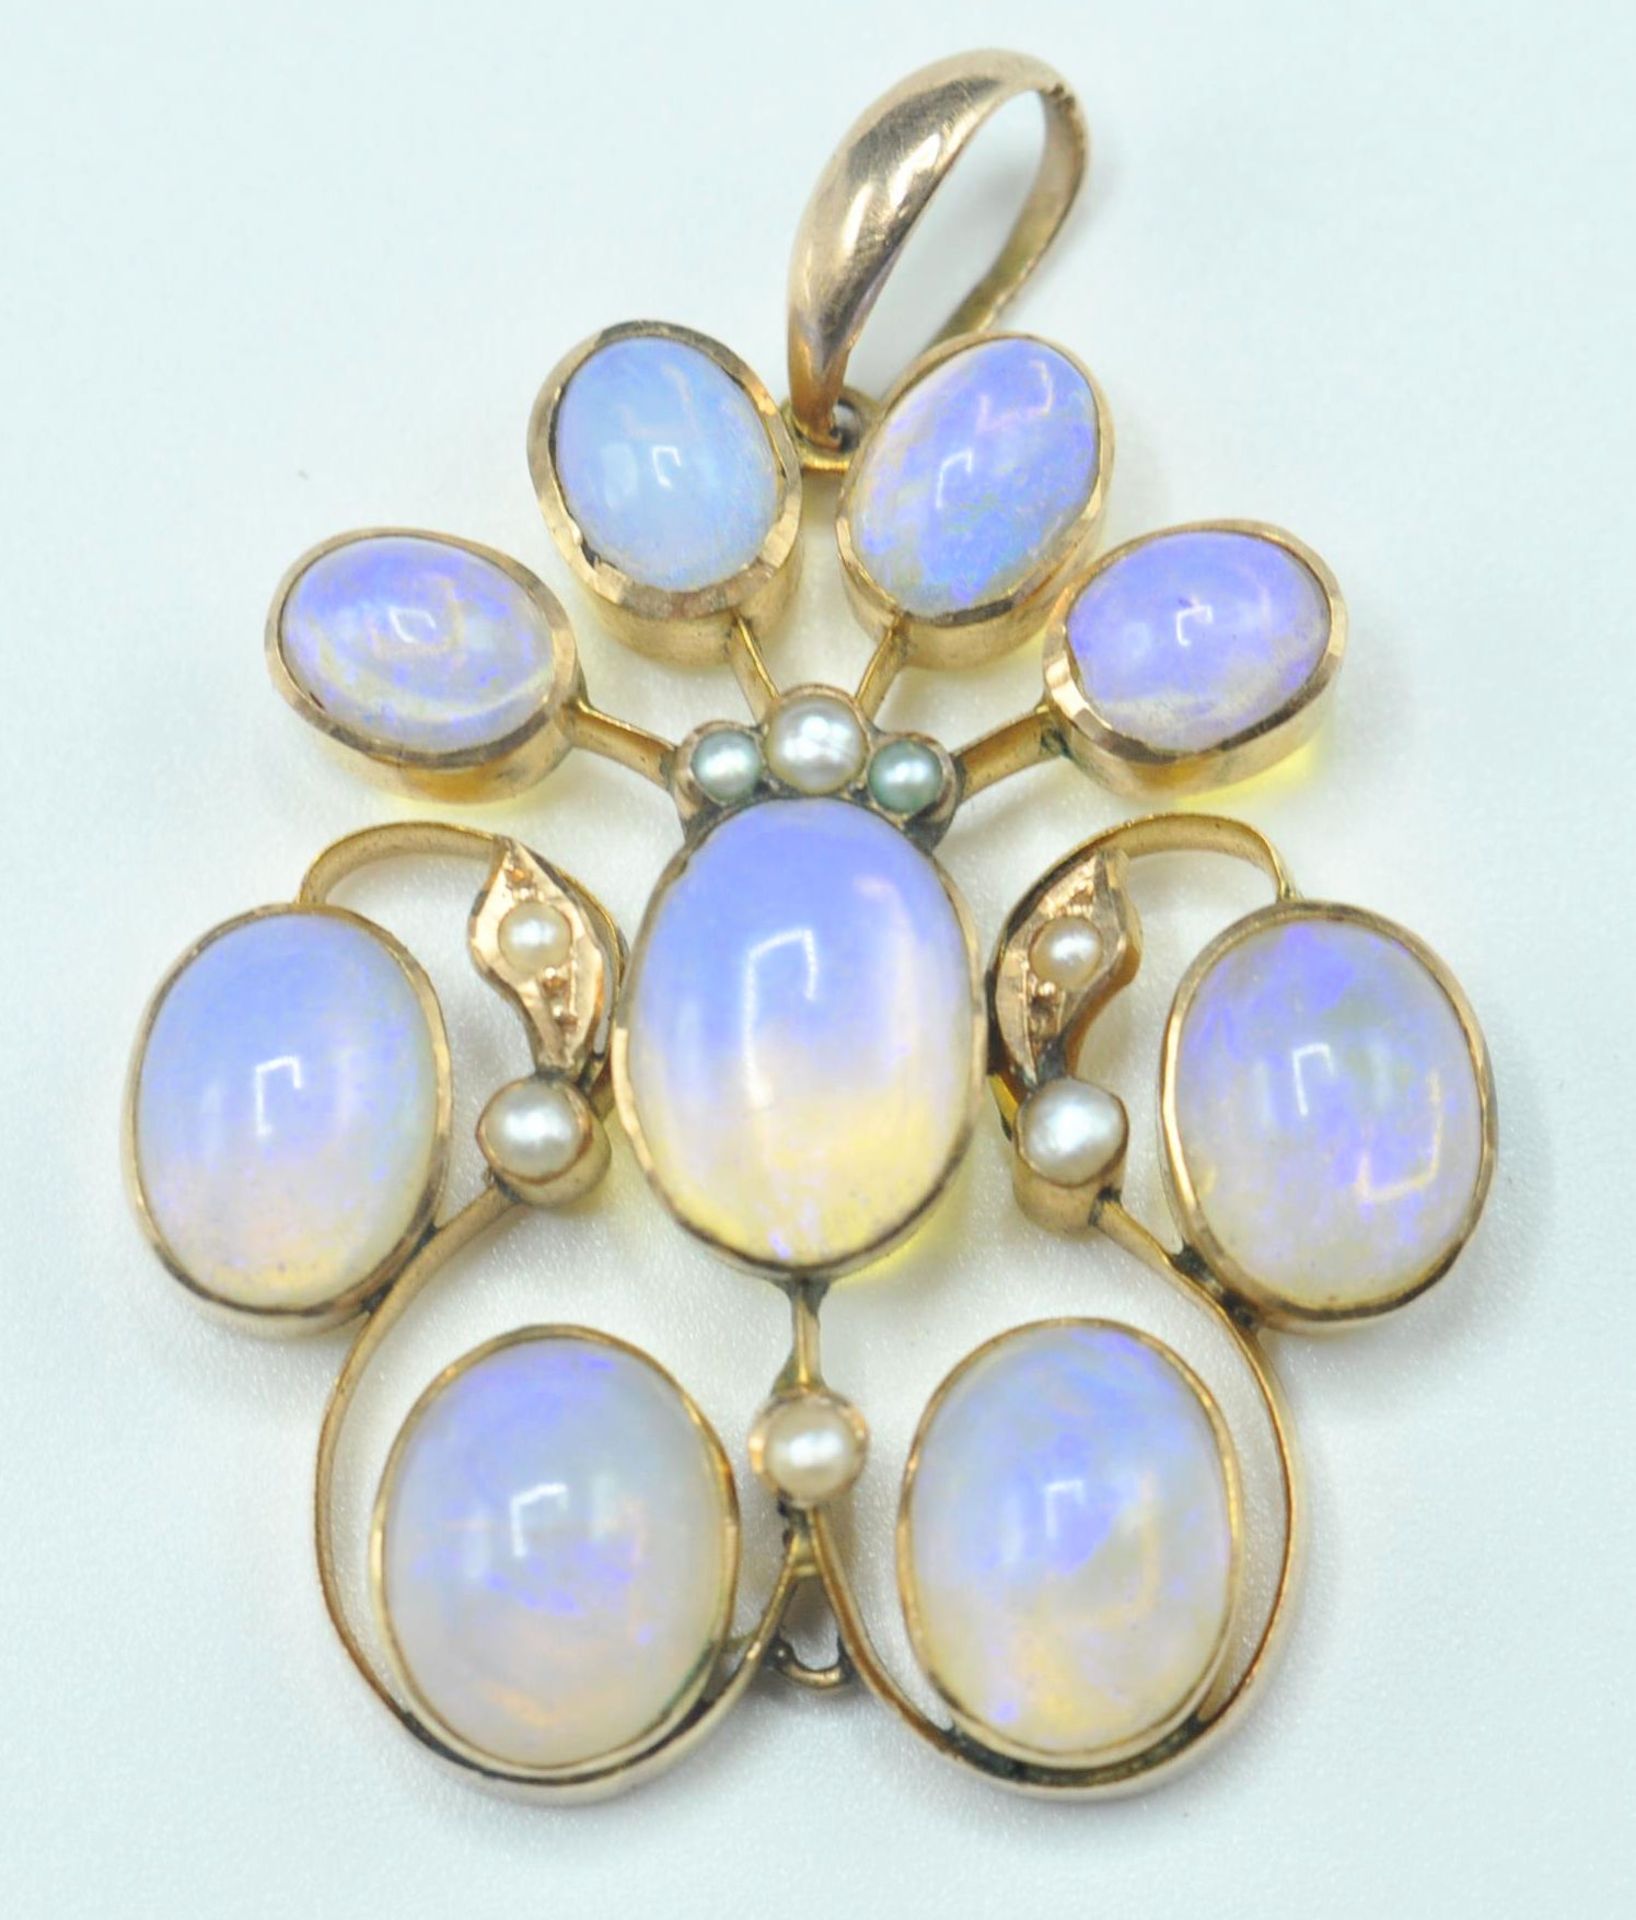 ANTIQUE GOLD OPAL AND SEED PEARL PENDANT